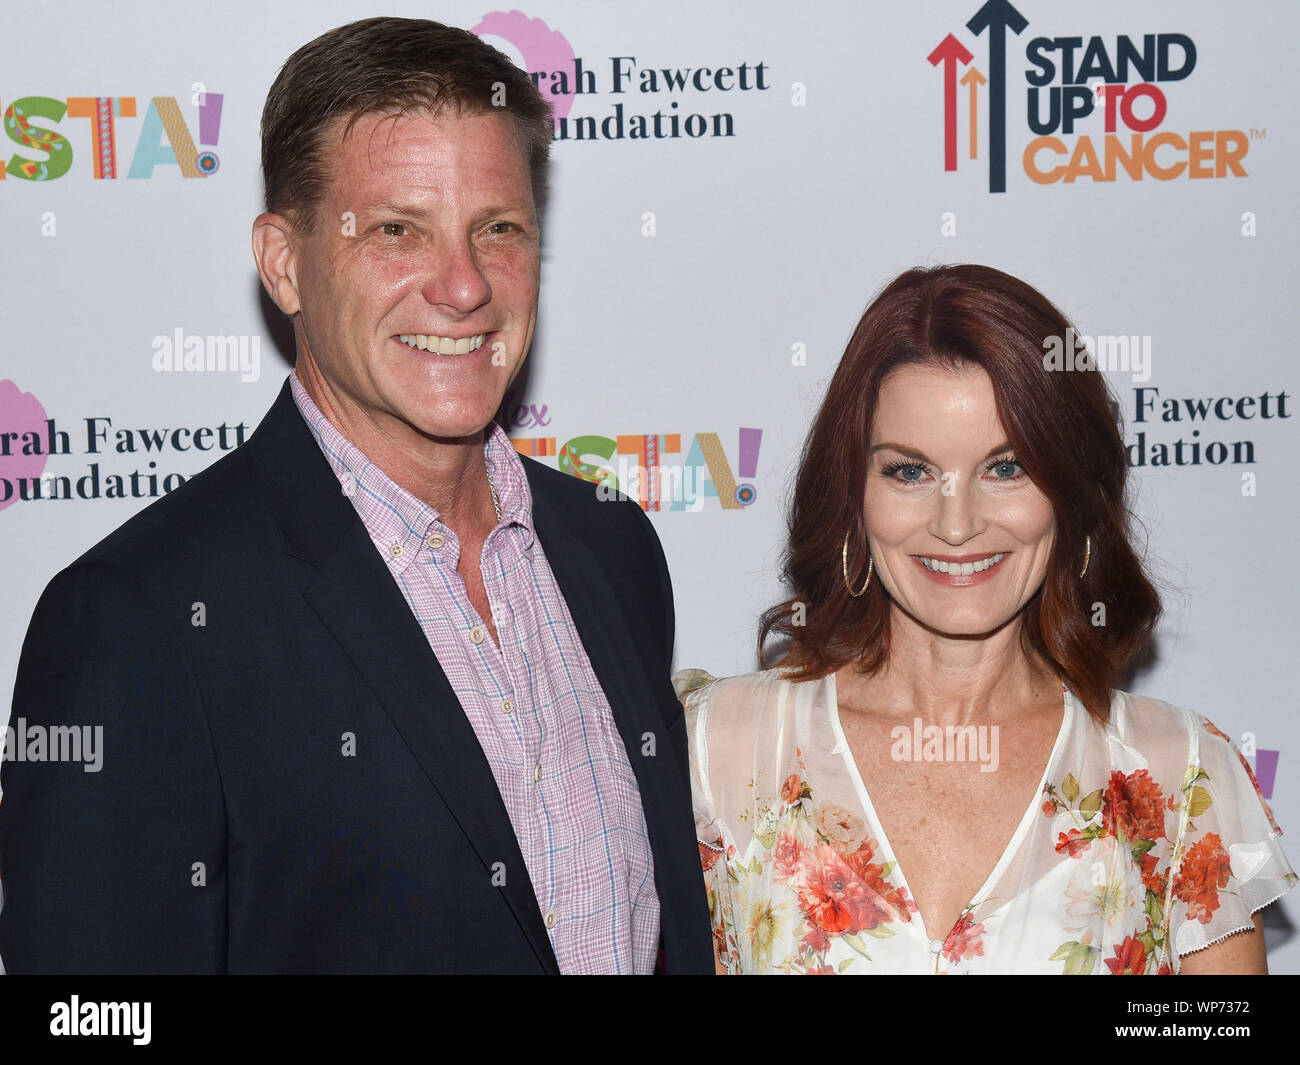 Beverly Hills, USA. 06th Sep, 2019. Doug Savant and Laura Leighton attends at the Farrah Fawcett Foundation's 'Tex-Mex Fiesta' honoring Marcia Cross at Wallis Annenberg Center for the Performing Arts in Beverly Hills, California, on September 6, 2019. Credit: The Photo Access/Alamy Live News Stock Photo